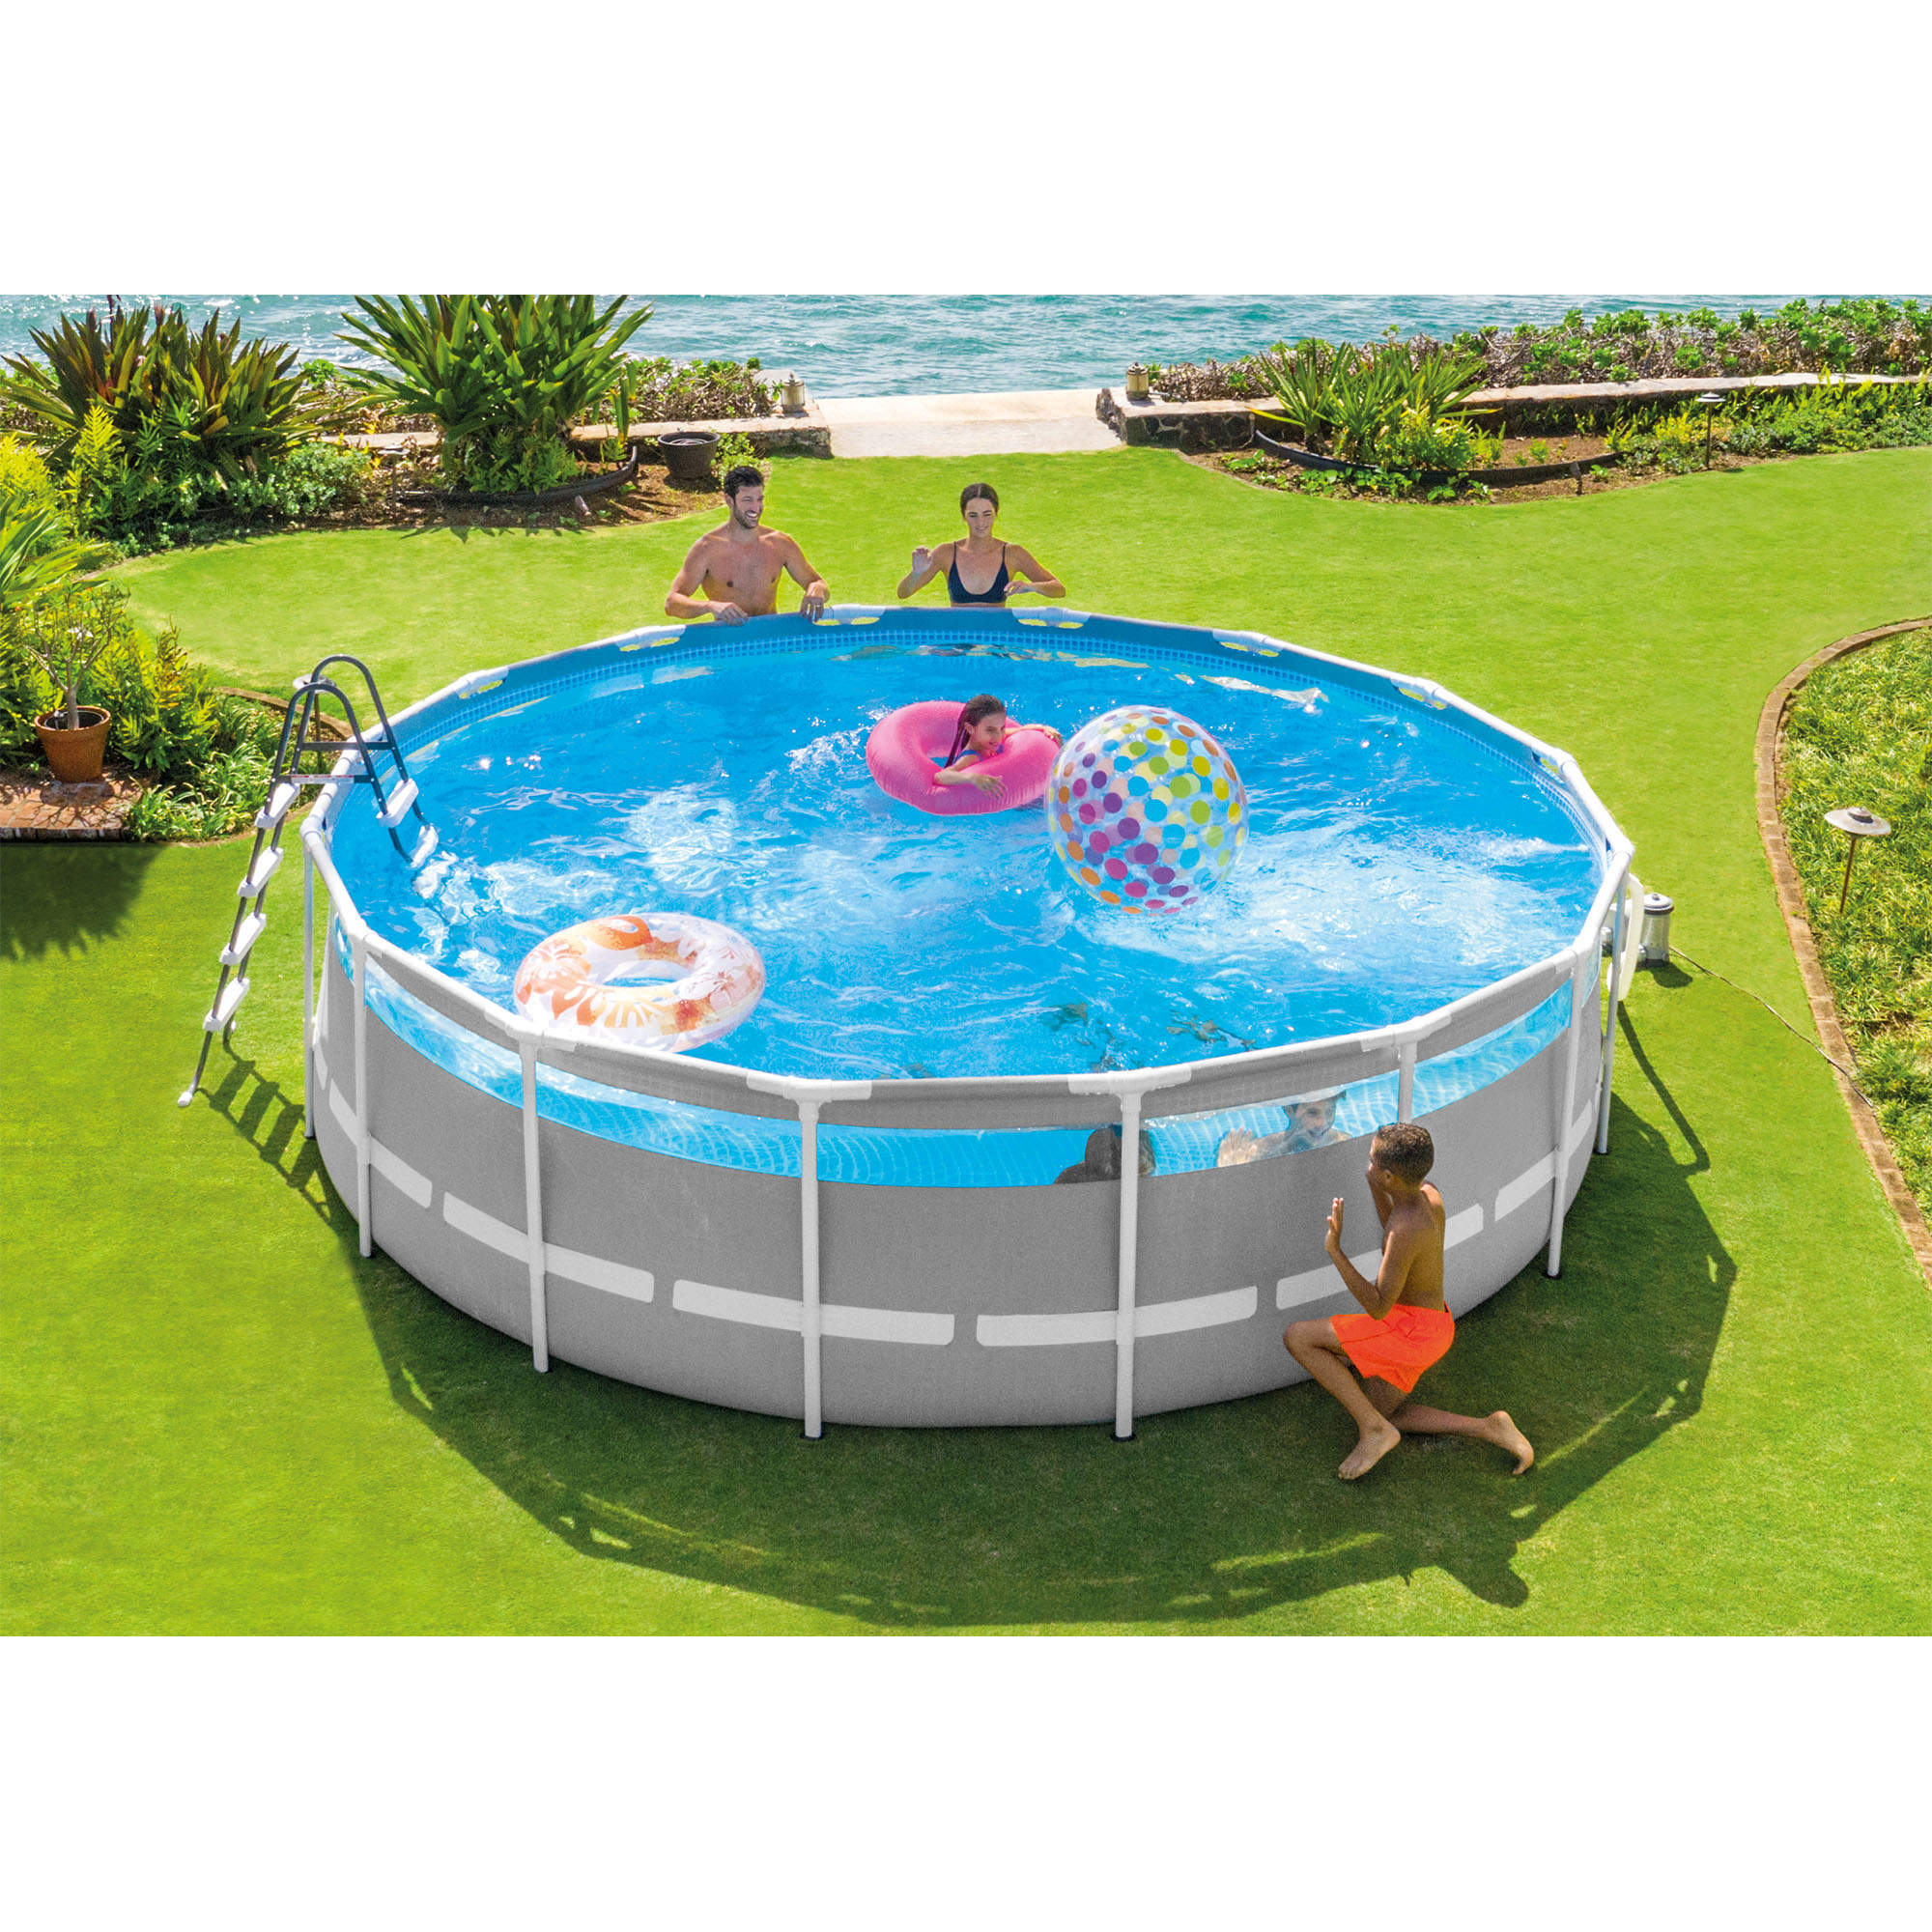 Easy Set Up and fits up to 6 People Intex 26729EH 16 Foot by 48 Inch Clearview Prism Metal Frame Above Ground Swimming Pool with Filter Pump 